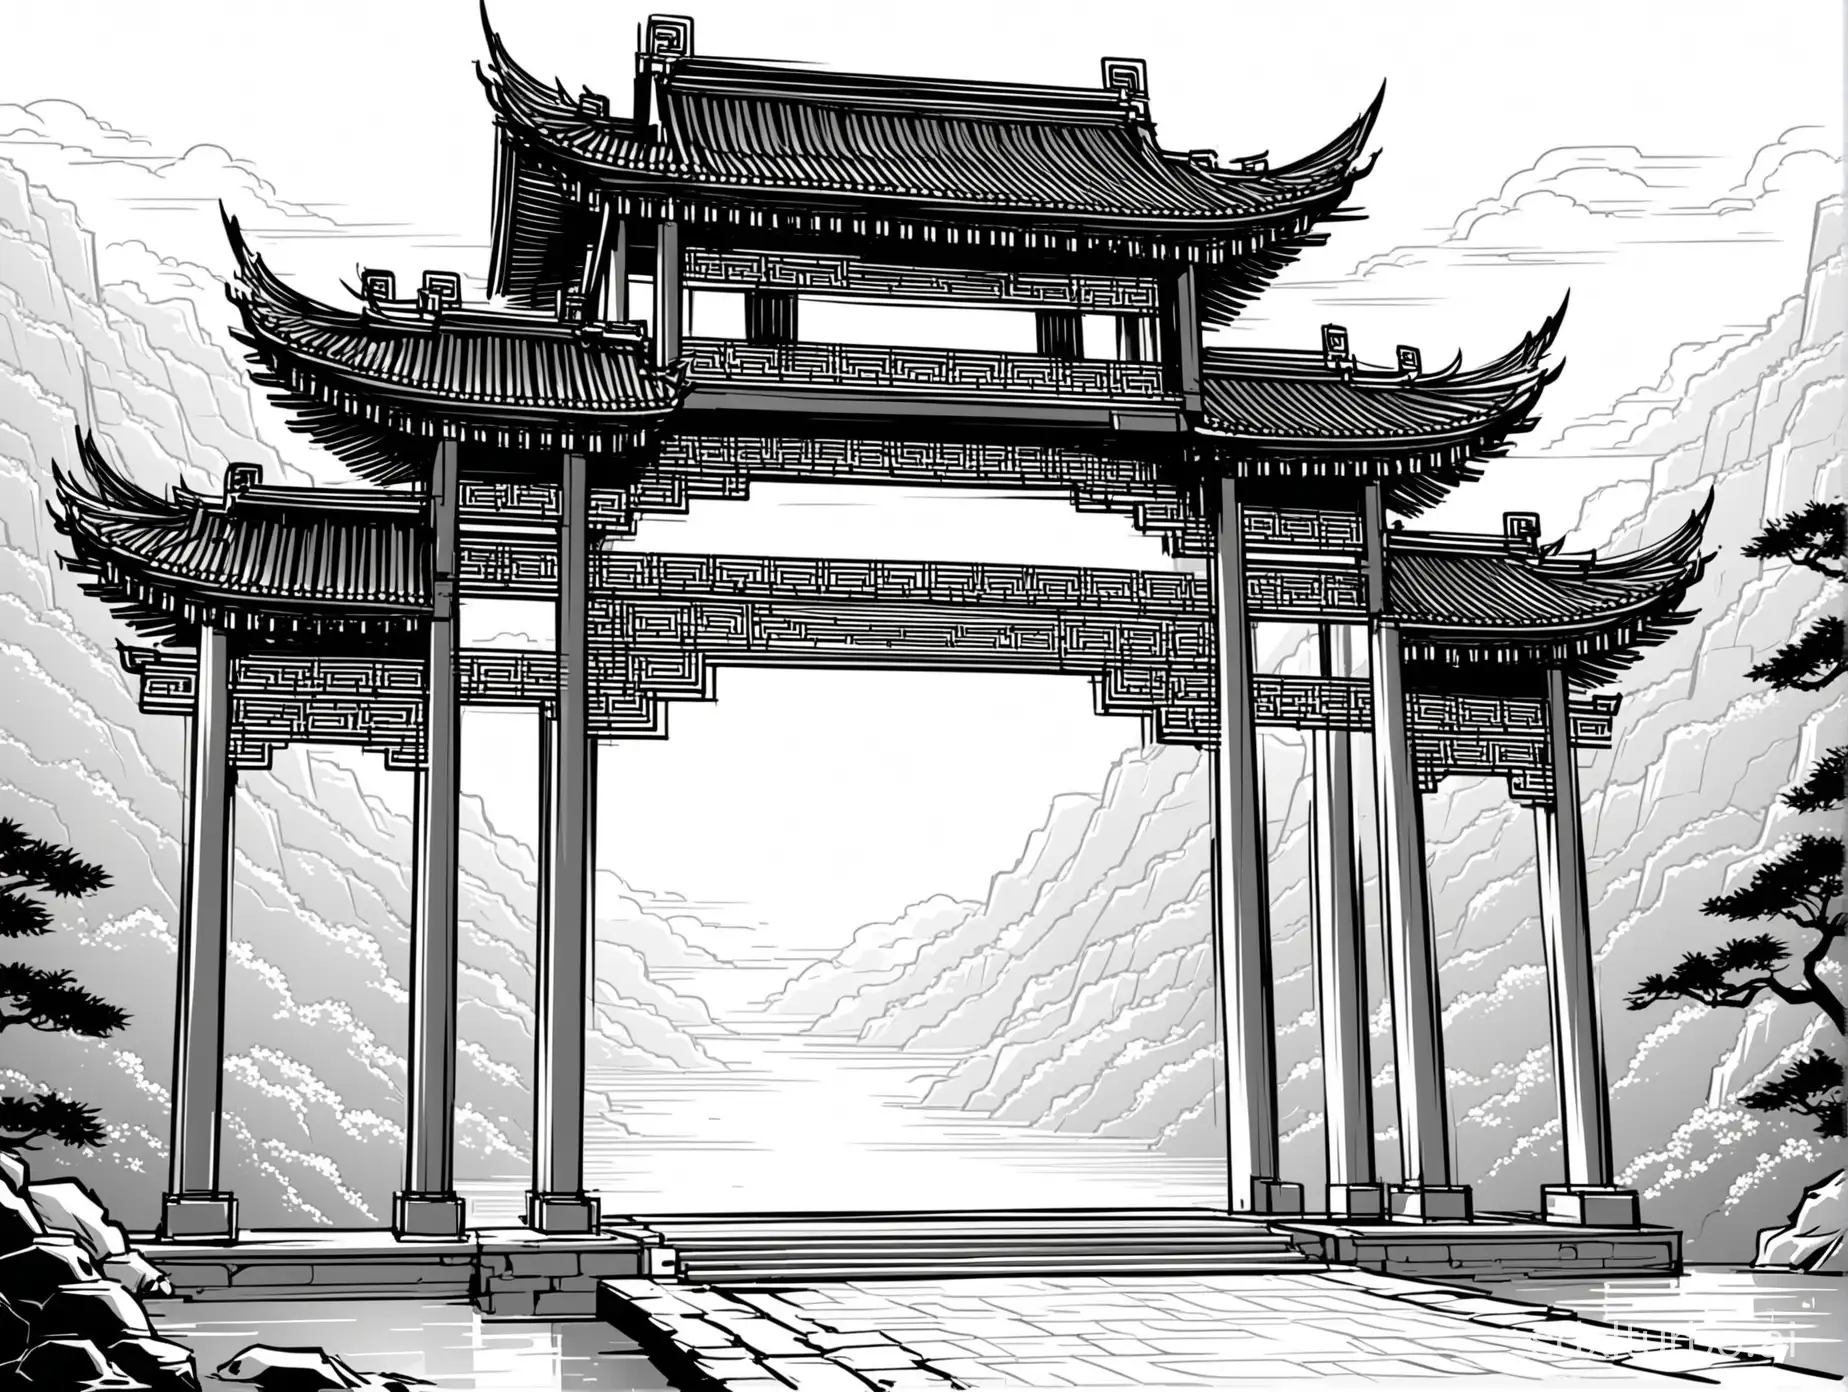 Use illustrator's vector line style to draw a standalone Chinese-style multi-layered archway, in black and white.